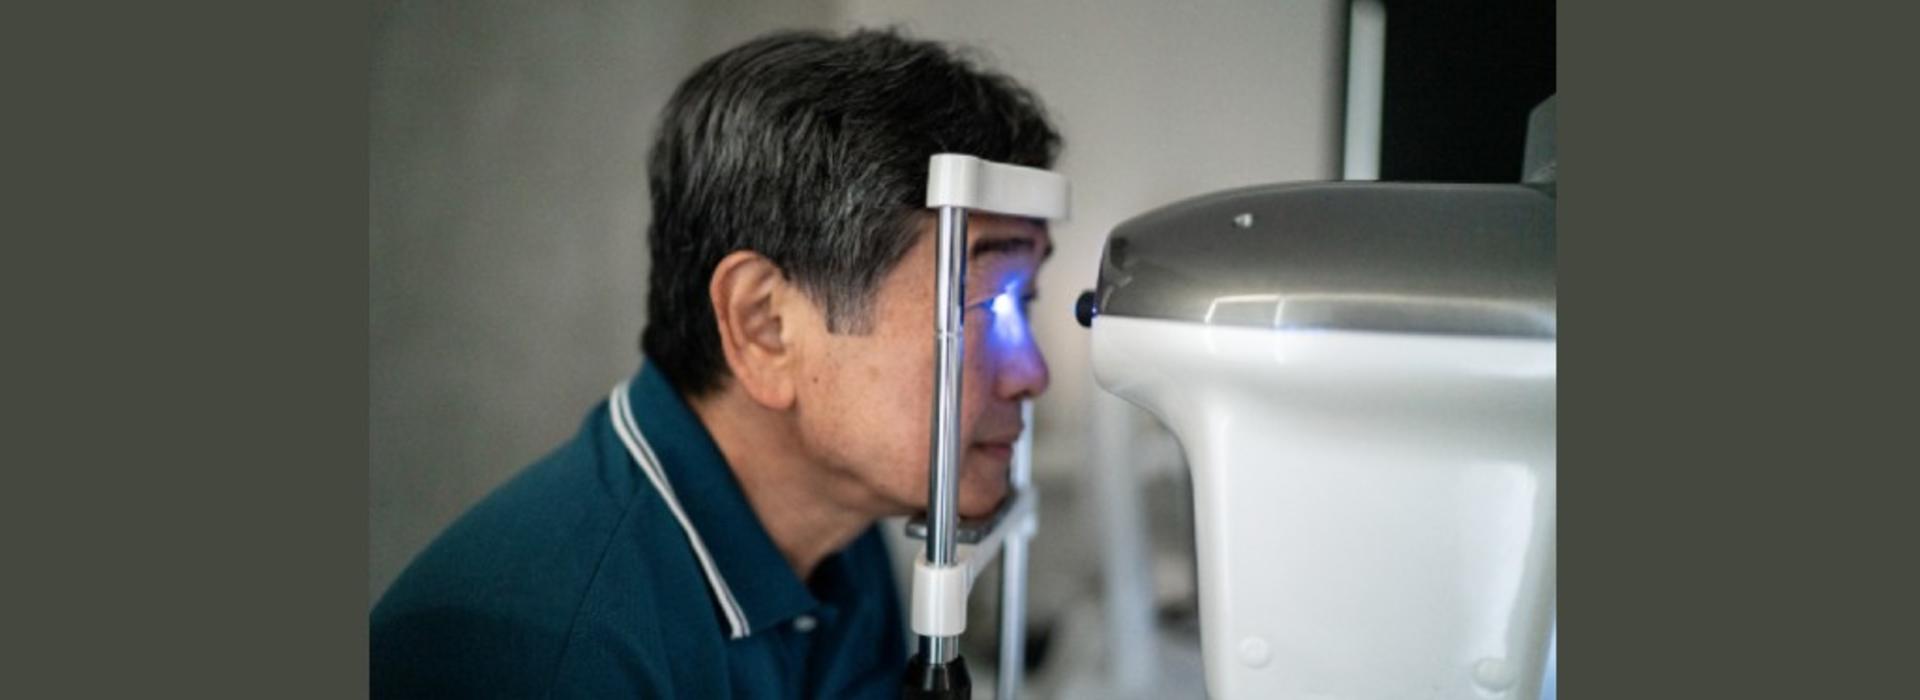 Man getting an eye scan, his head resting on a chin rest as a machine shines blue light into one of his eyes